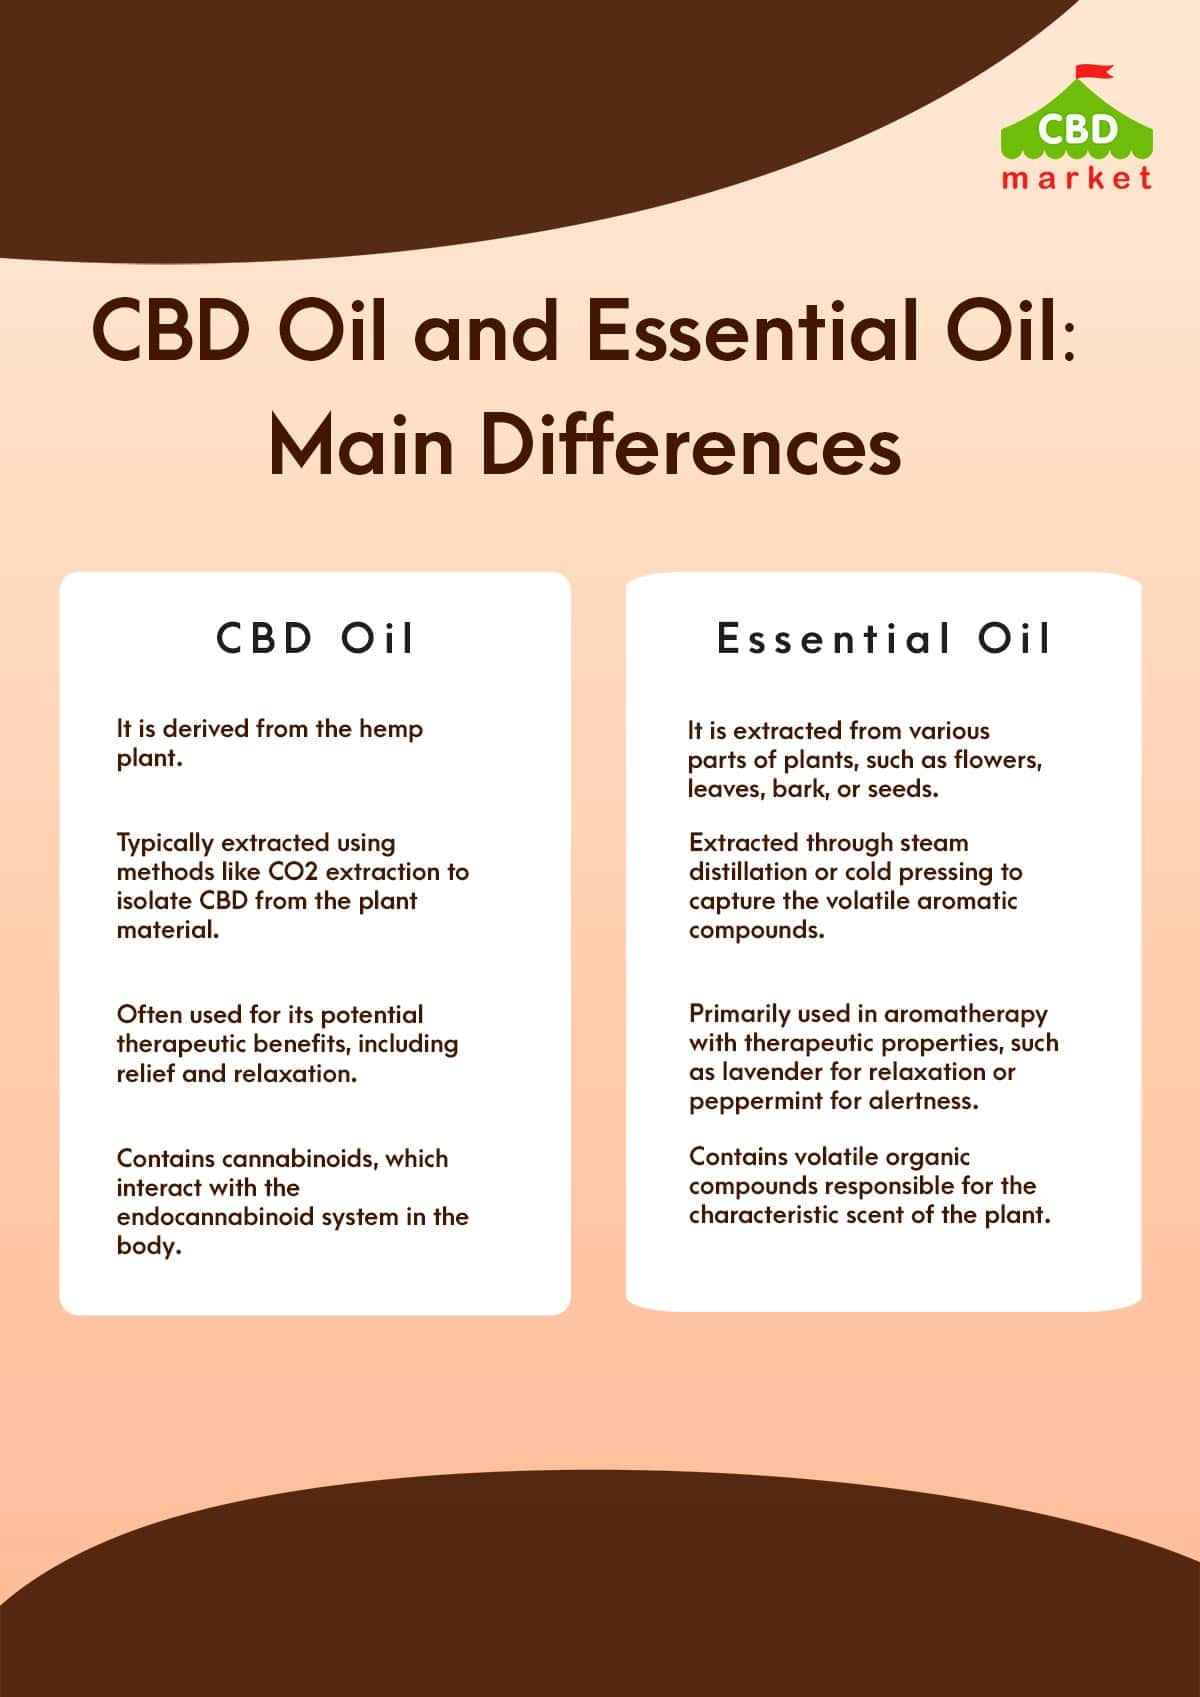 Basic Differences Between CBD Oil and Essential Oil